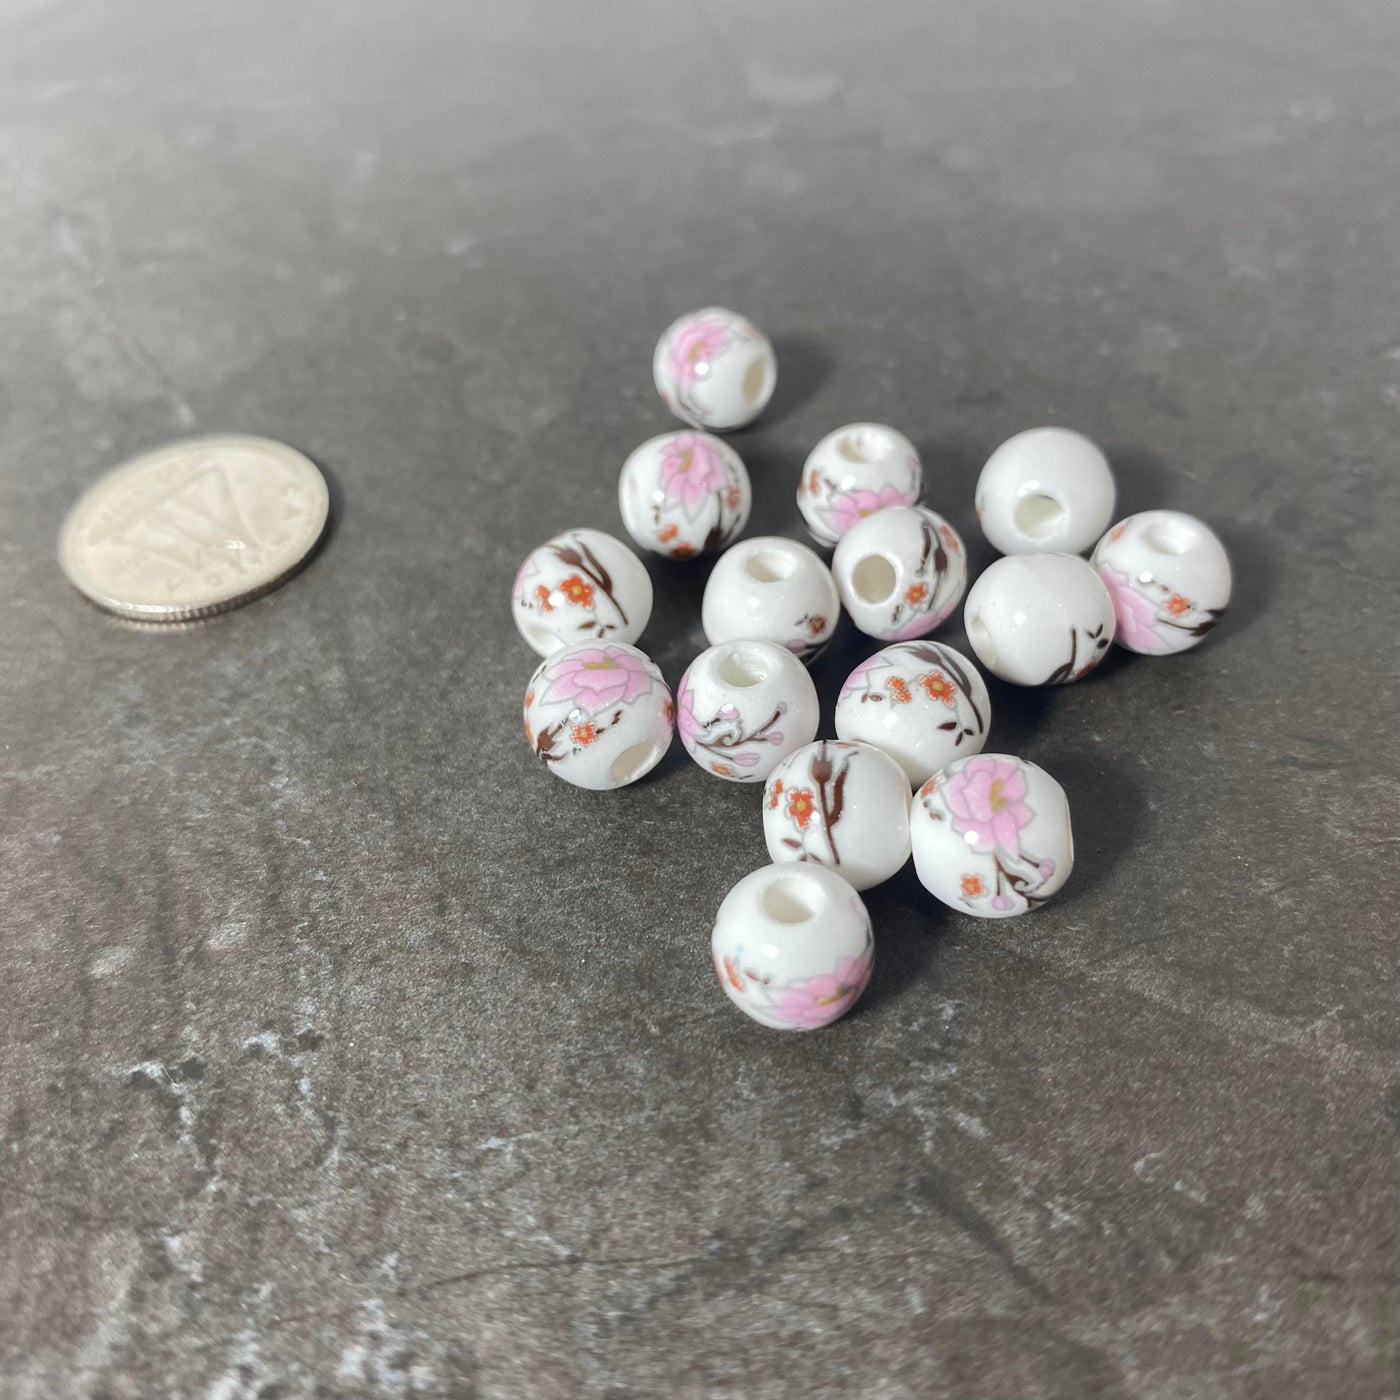 Lot of white, pink &amp; brown flowered ceramic stone 8 mm